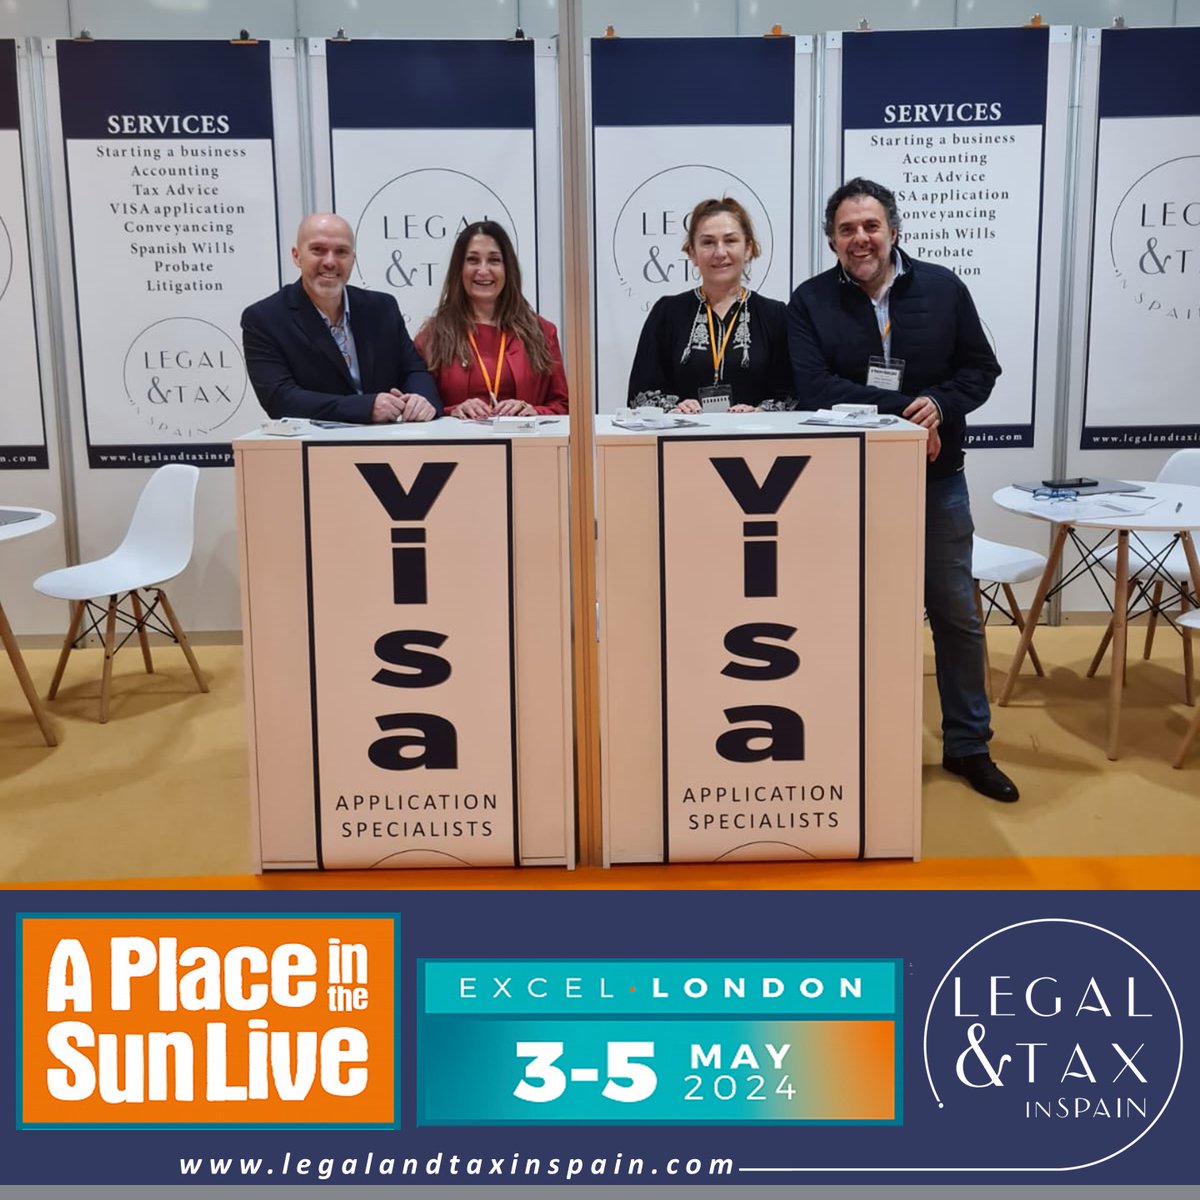 Team ready for the last day at 𝐏𝐋𝐀𝐂𝐄 𝐈𝐍 𝐓𝐇𝐄 𝐒𝐔𝐍 𝐋𝐈𝐕𝐄 𝐢𝐧 𝐋𝐨𝐧𝐝𝐨𝐧 𝟐𝟒 #legalandtaxinspain #aplaceinthesun #taxinspain #spanishsolicitor